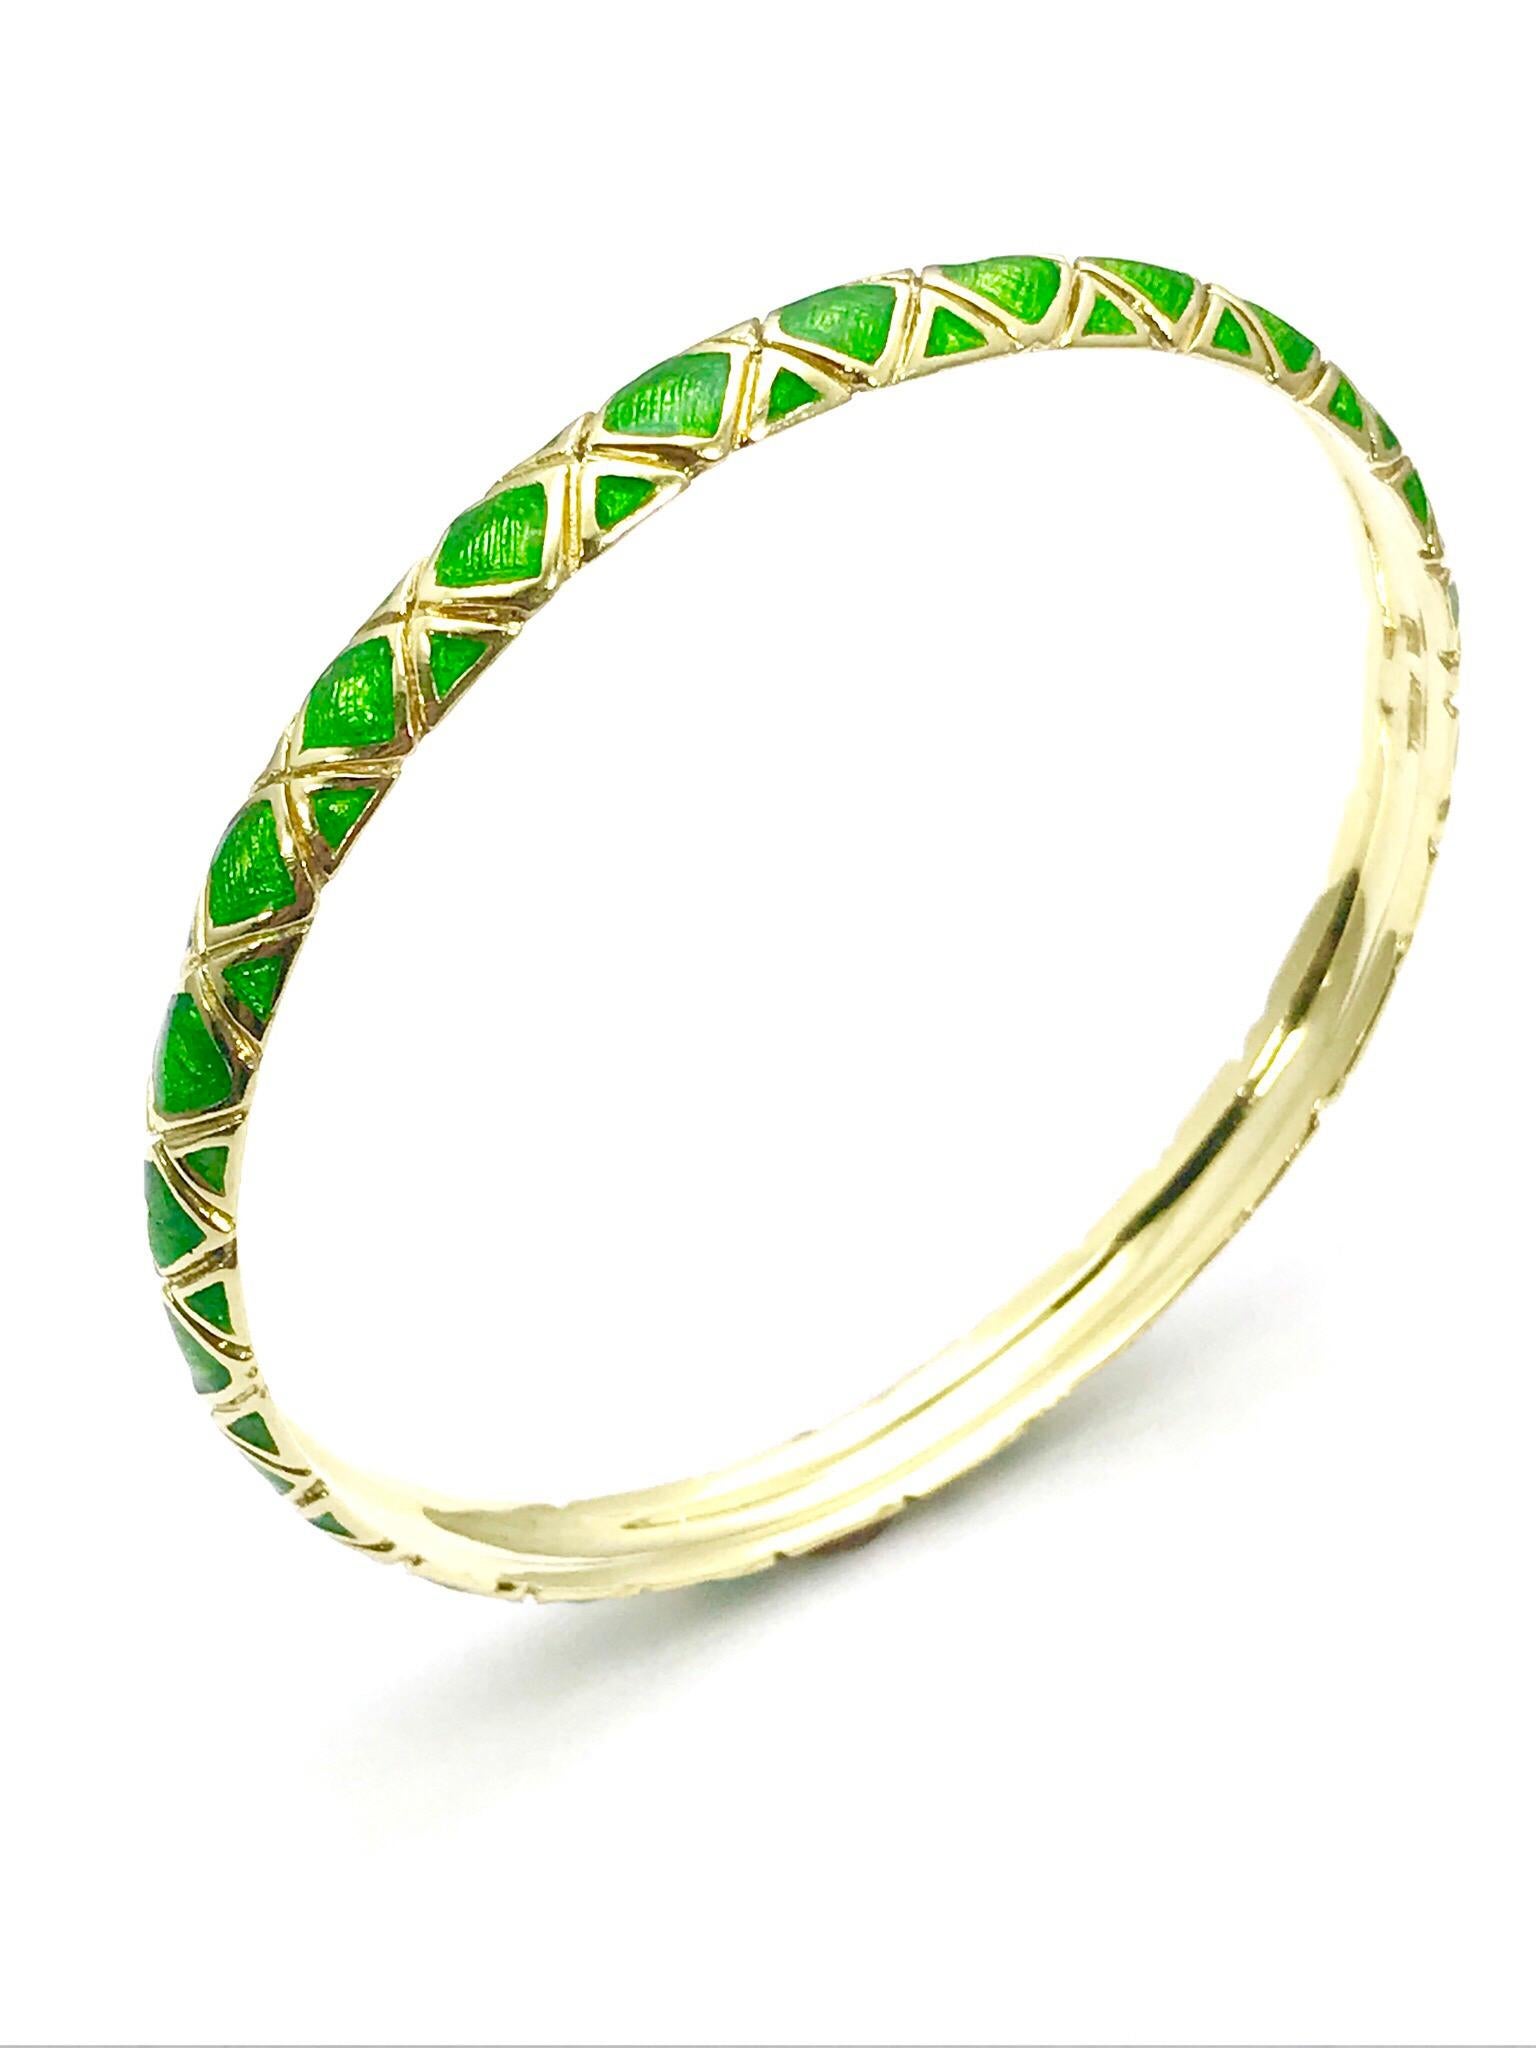 A beautiful Tiffany & Co. 18 karat yellow gold bangle bracelet finished in a vibrant emerald green guilloche enamel.  The bracelet shows an 